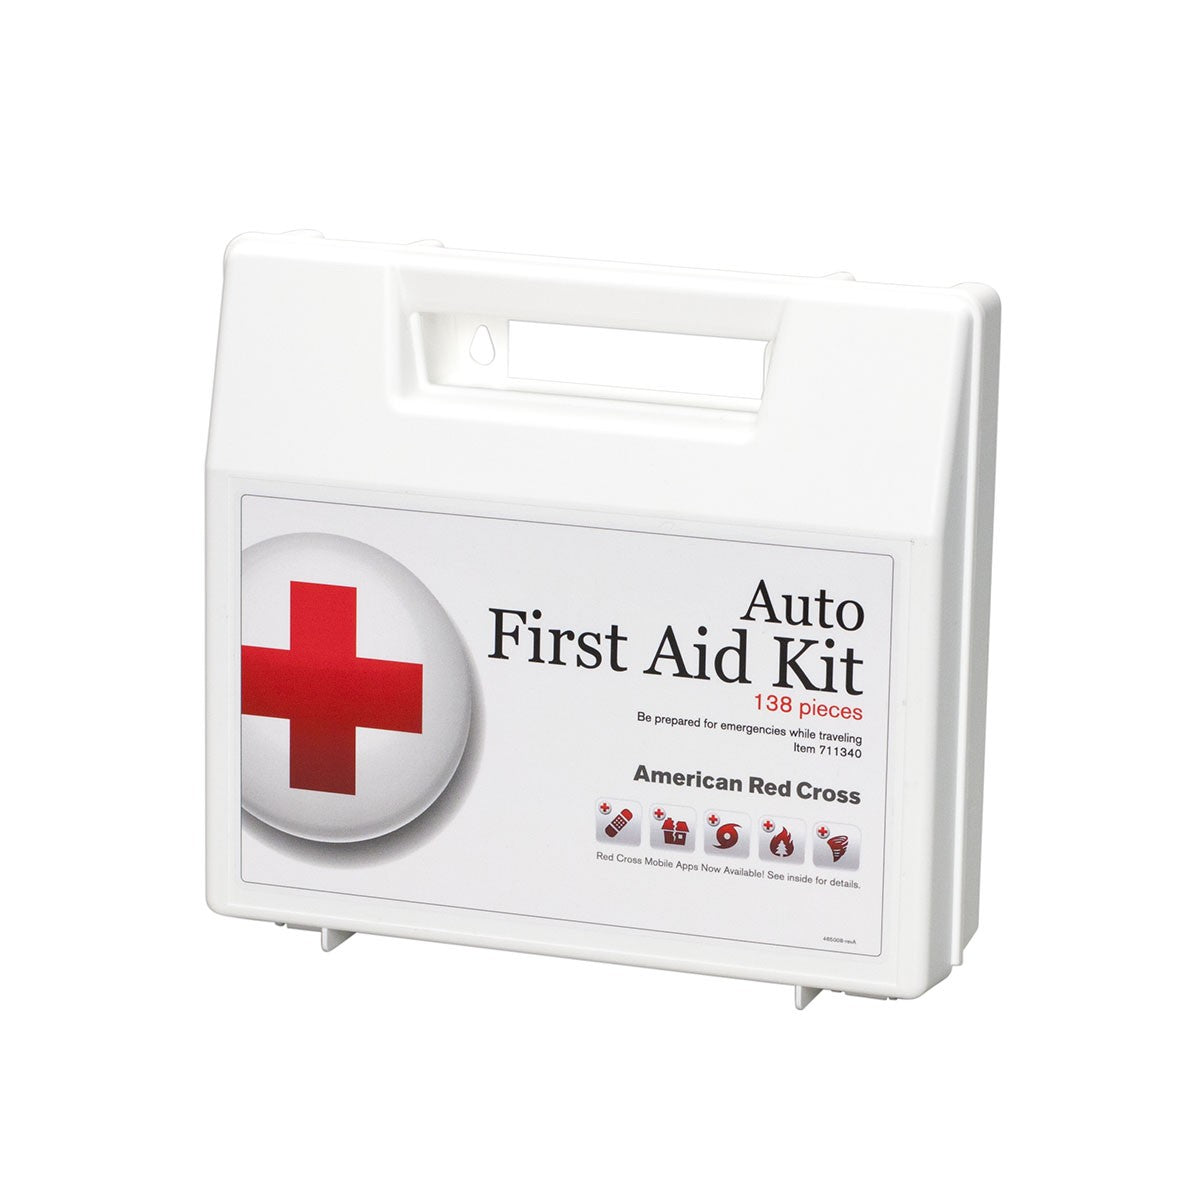 American Red Cross Deluxe Auto First Aid Kit - BS-FAK-711340-1-FM